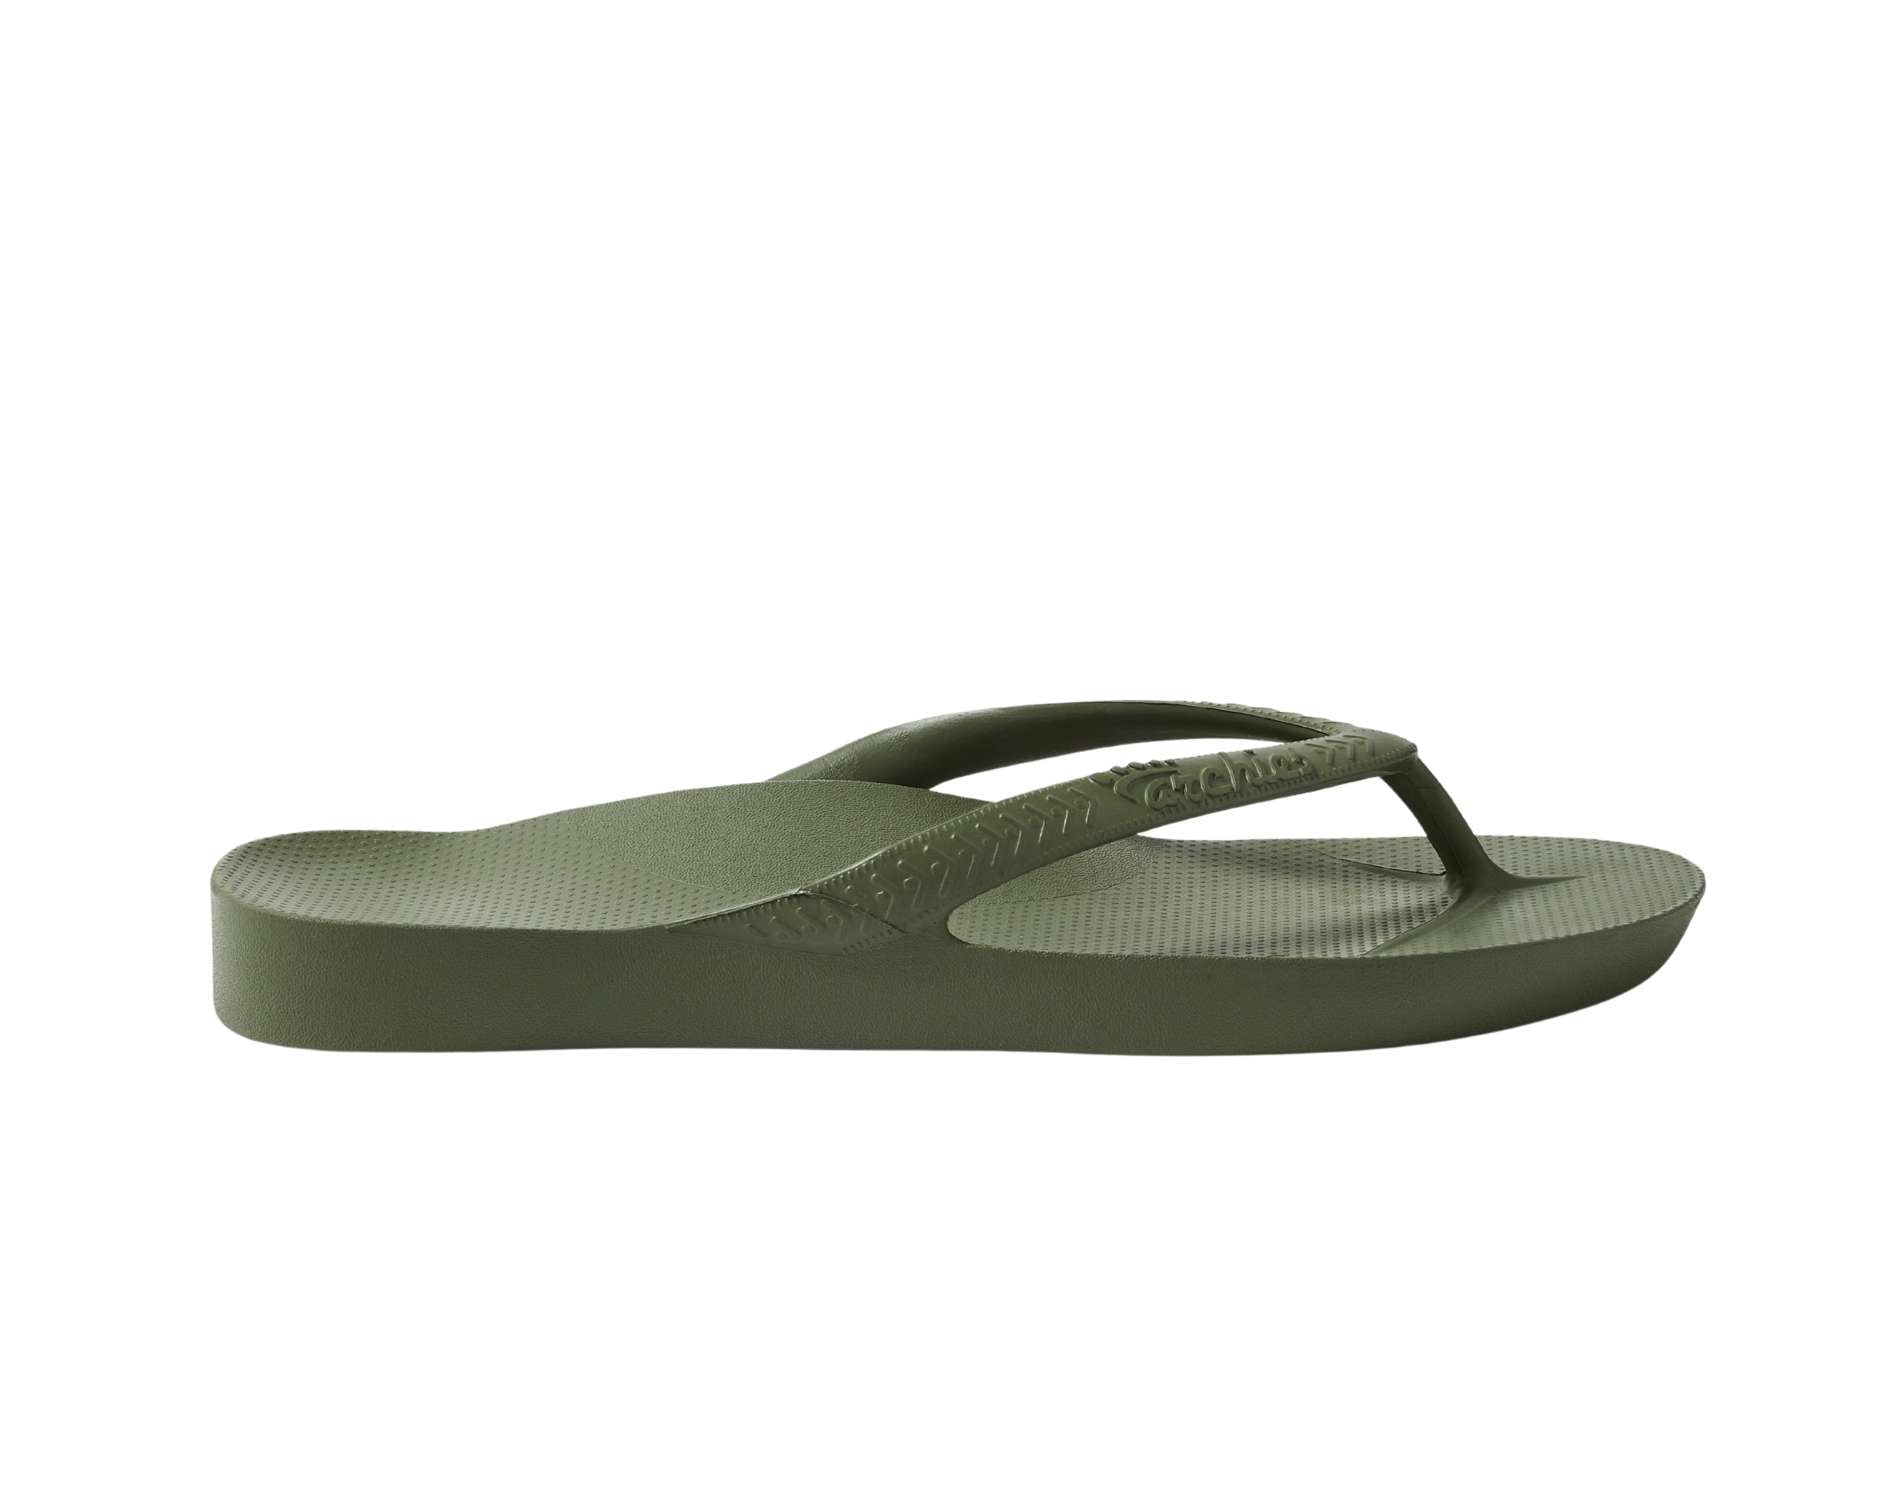 Archies arch support thongs in khaki colour